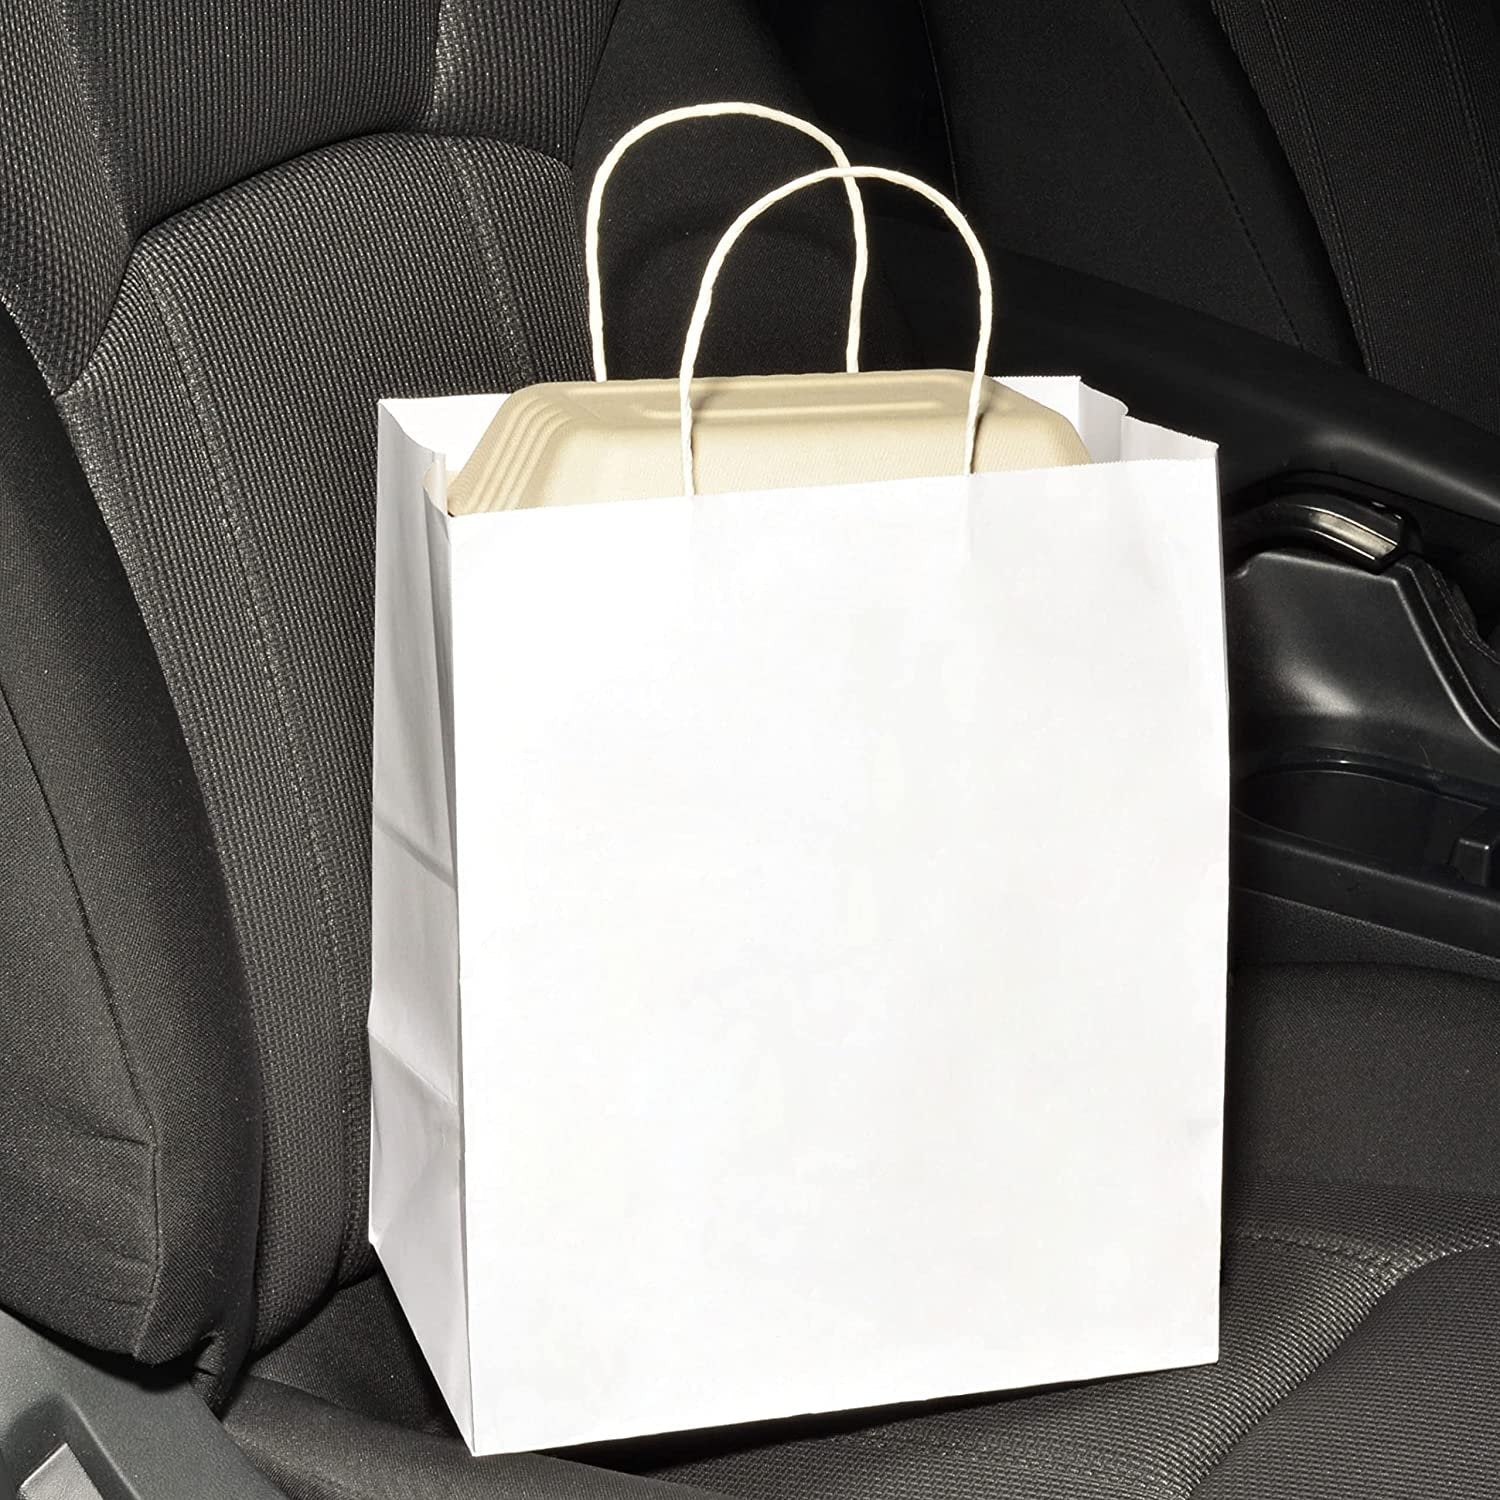 Take Out Bags - 50 Pack White Paper Bags with Handles, Paper Shopping Bags, Bulk Gift Bags, Kraft, Party, Favor, Goody, Take-Out, Merchandise, Retail Bags, 80% PCW Bistro Size Medium - 10x6.75x12